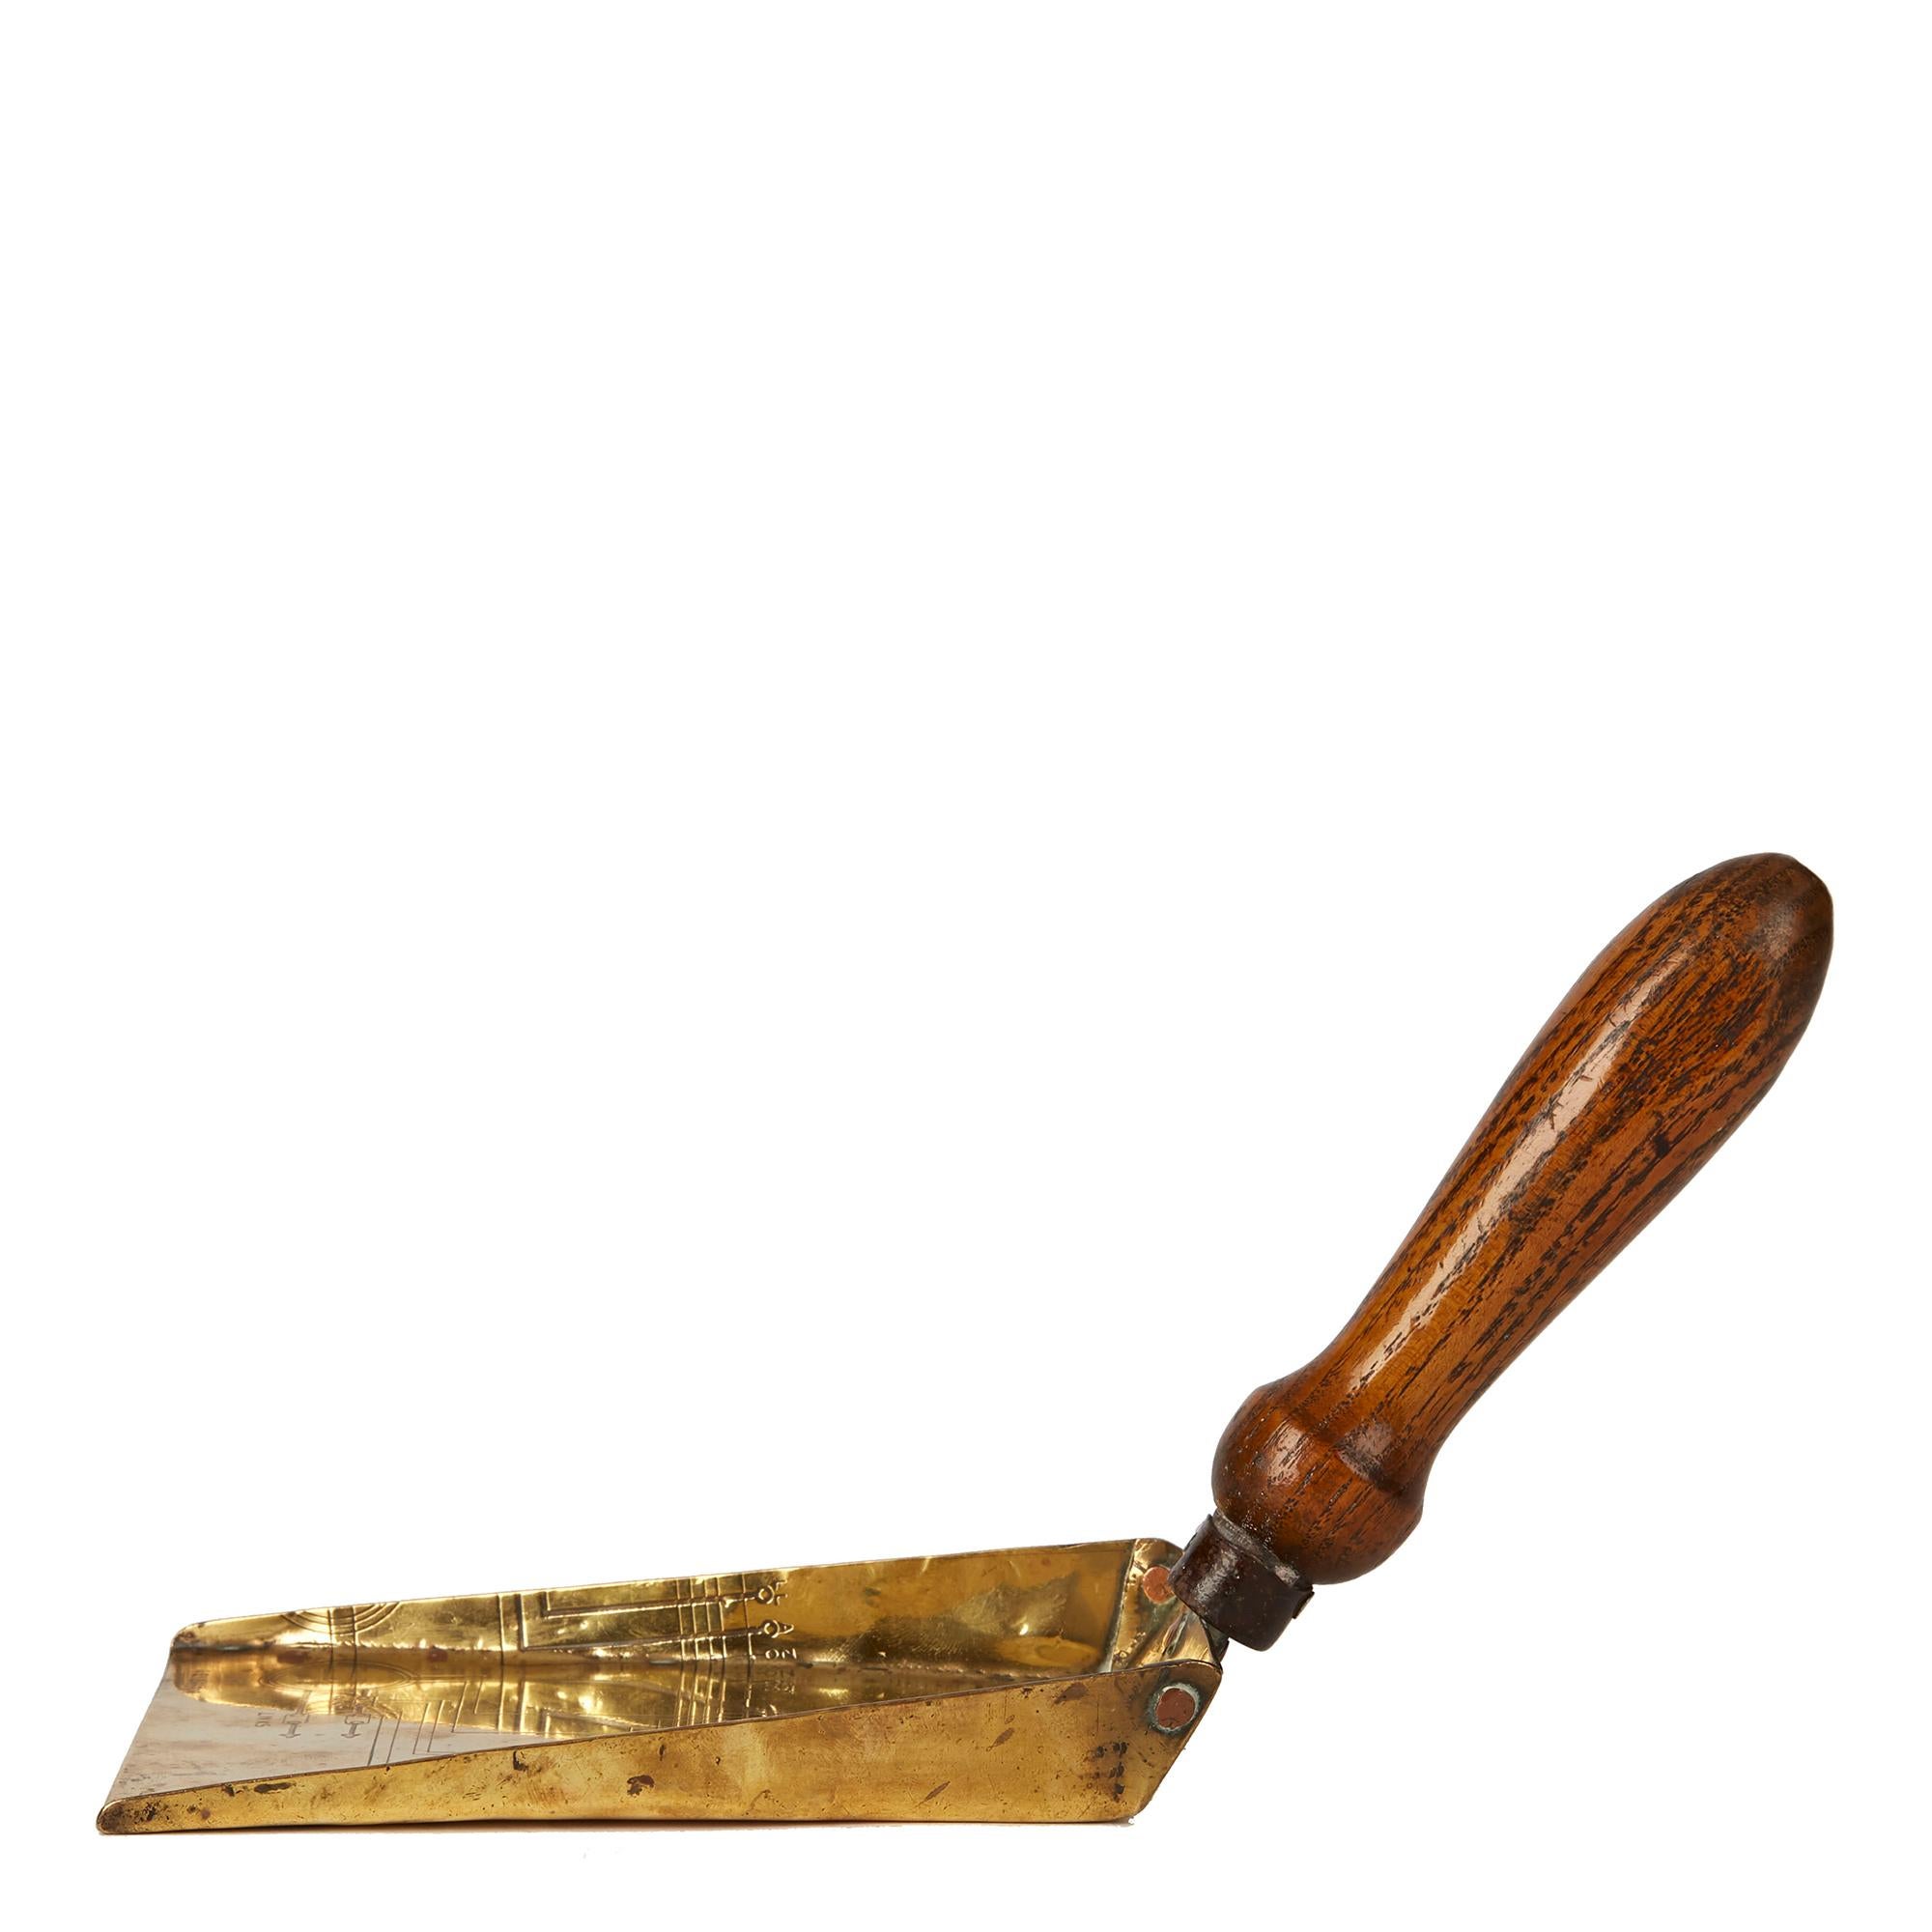 A very unusual and rare Arts & Crafts hand shovel of flat wide shape with a shaped oak handle, the main body in brass and attached with copper rivets. The body of the shovel has a diagram titled 'M' POTENTIOMETER, the diagram is finely engraved into